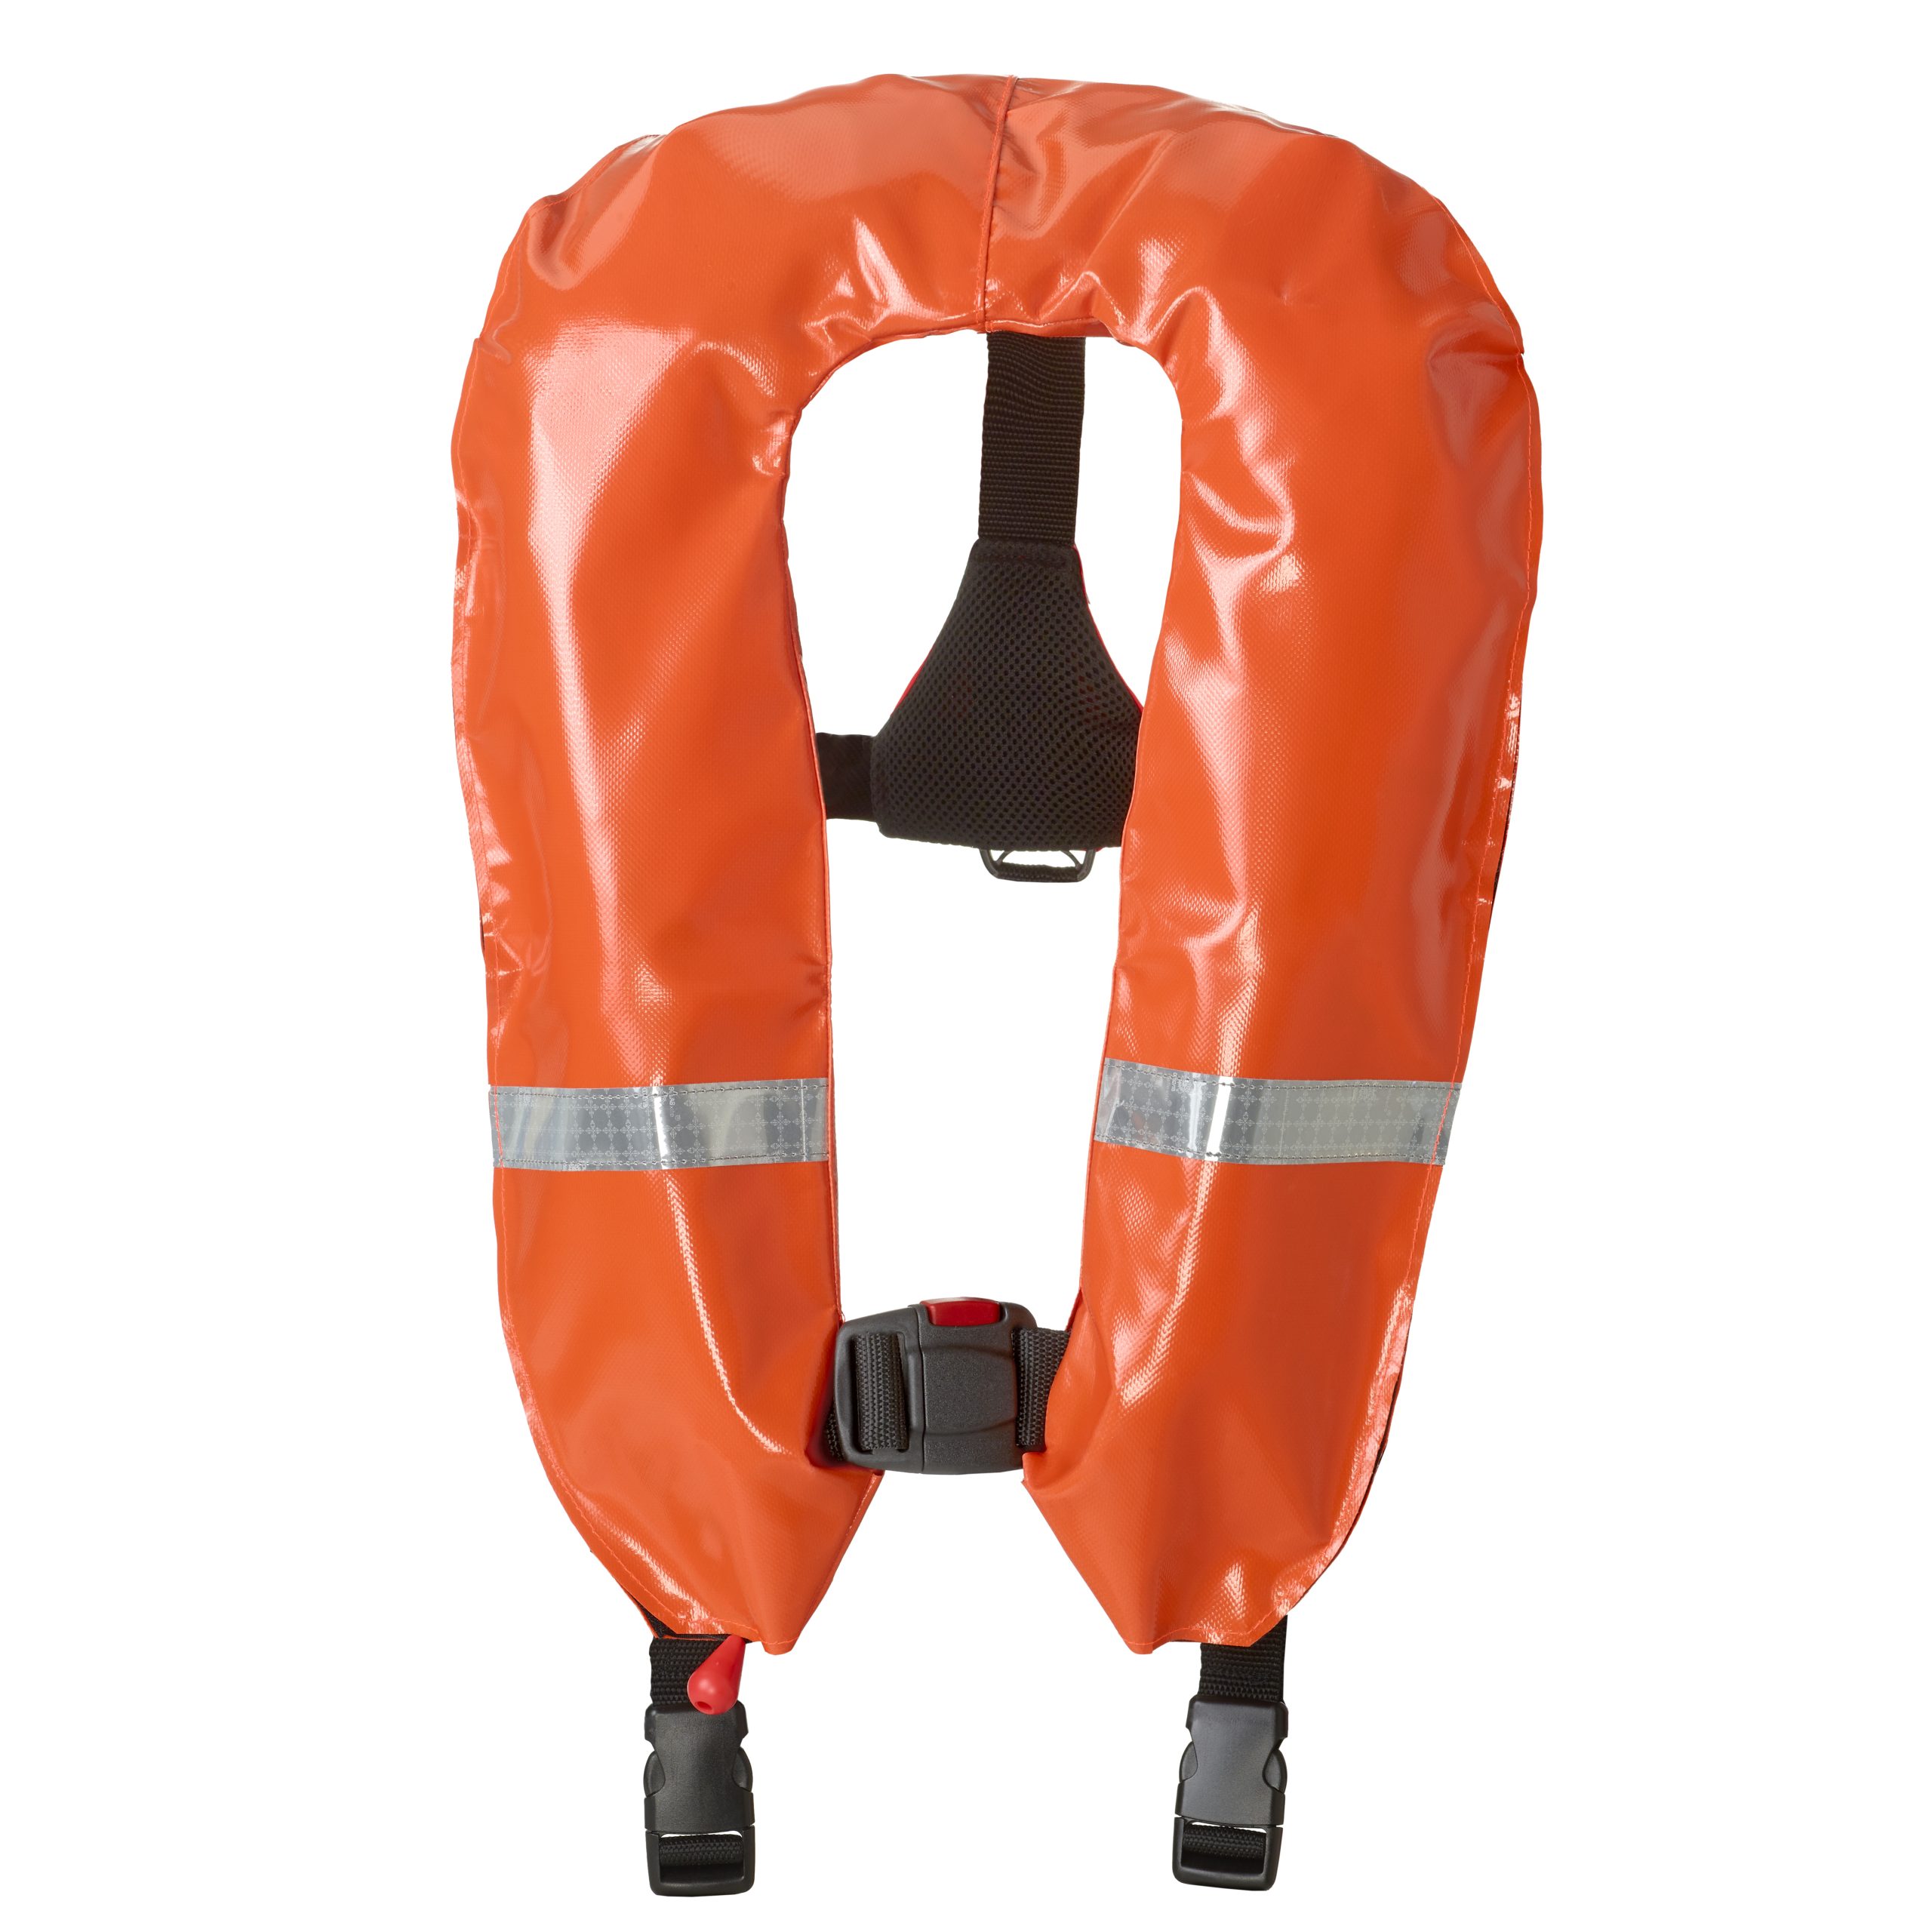 Baltic PVC Protective Lifejacket Cover | Suffolk Marine Safety